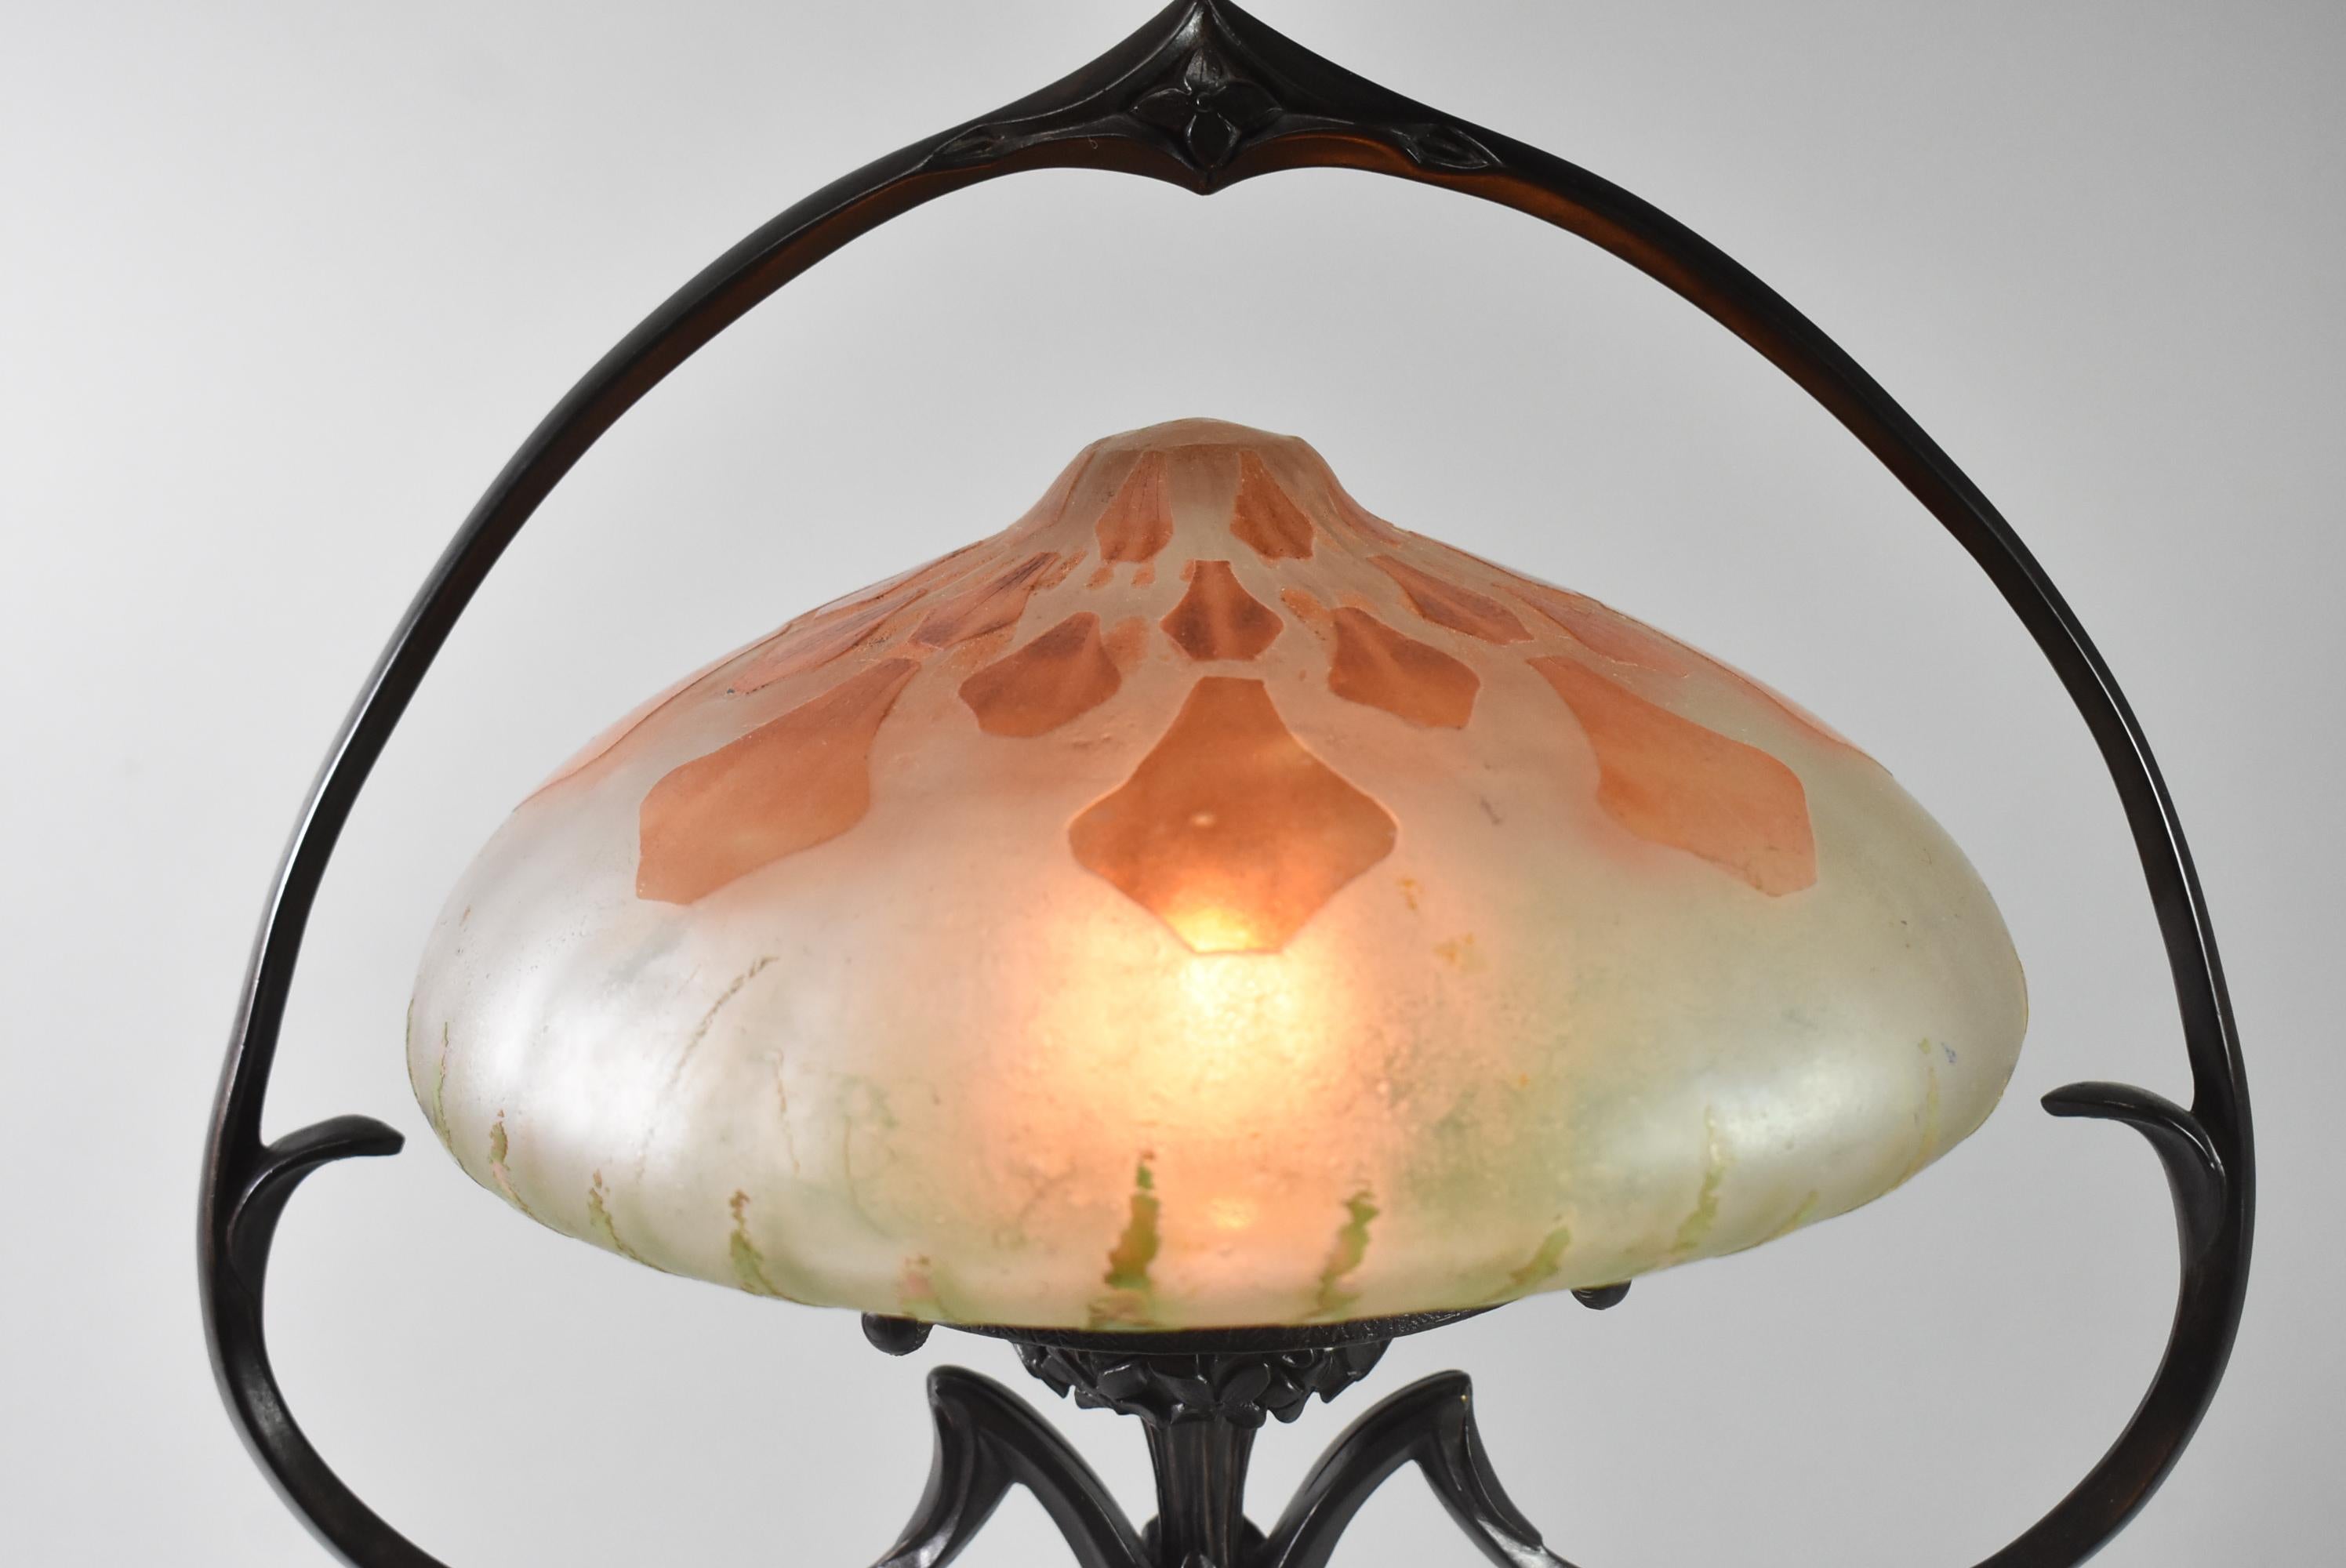 Early 20th Century Art Nouveau Table Lamp with Daum Nancy Shade, Circa 1900 France For Sale